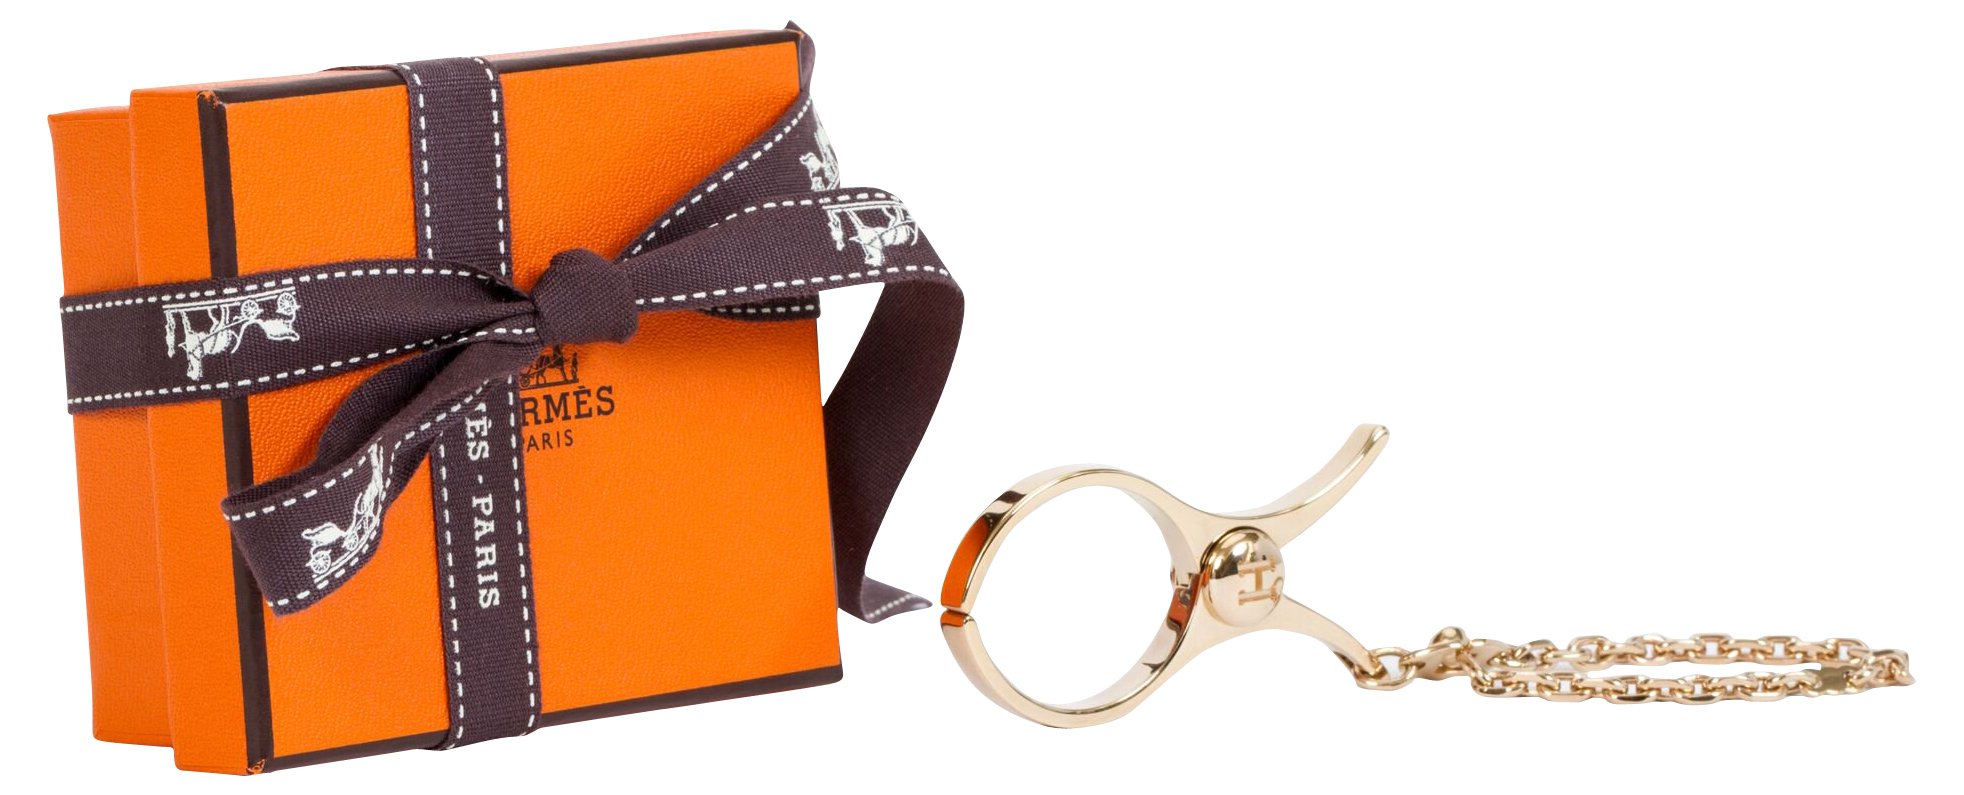 Authentic Hermes Stainless Steel Glove Clip Bag Charm 